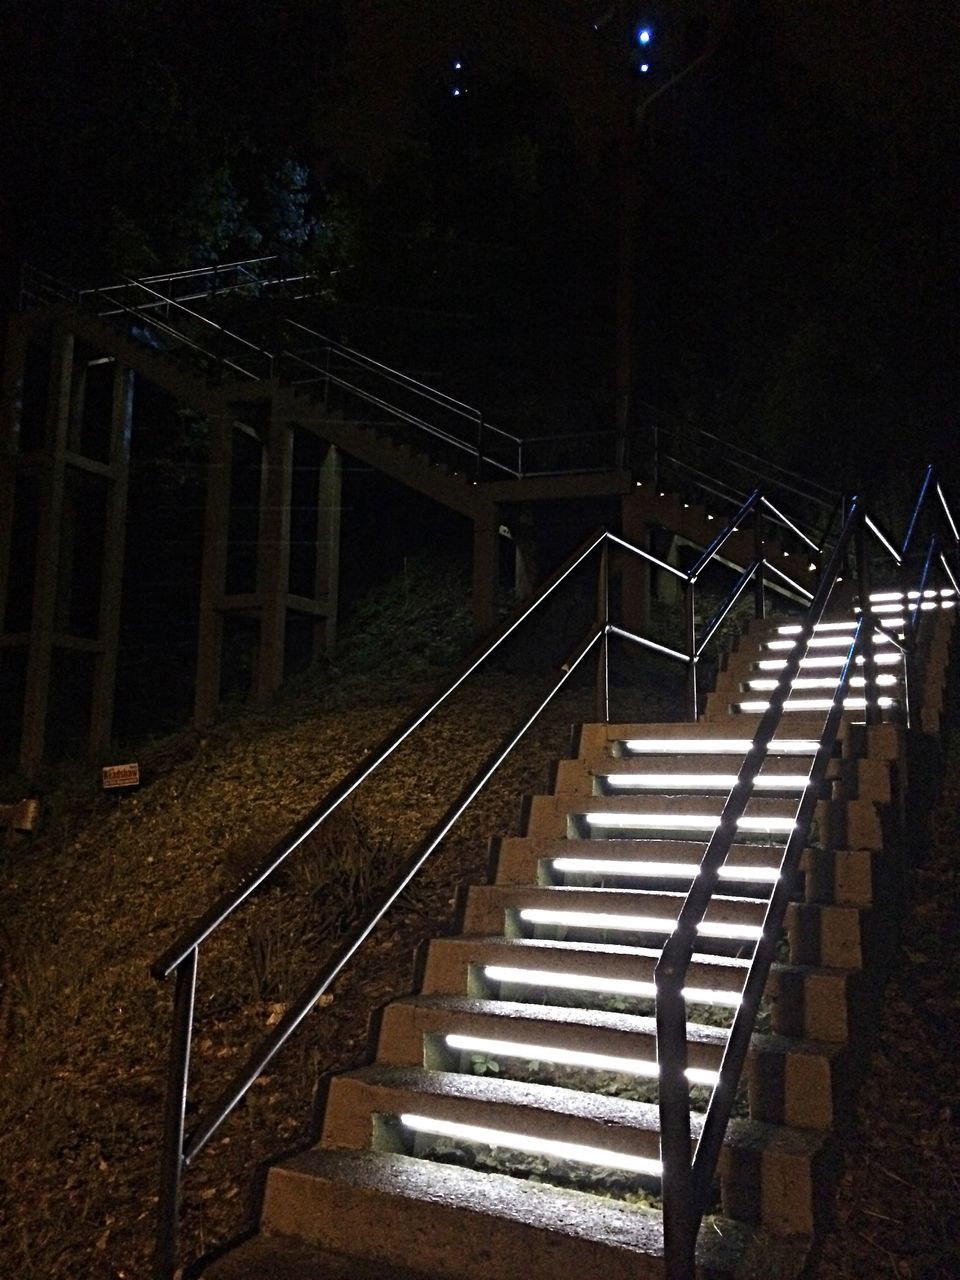 night, railing, steps, built structure, illuminated, steps and staircases, architecture, staircase, the way forward, empty, railroad track, absence, building exterior, metal, diminishing perspective, no people, outdoors, high angle view, rail transportation, lighting equipment